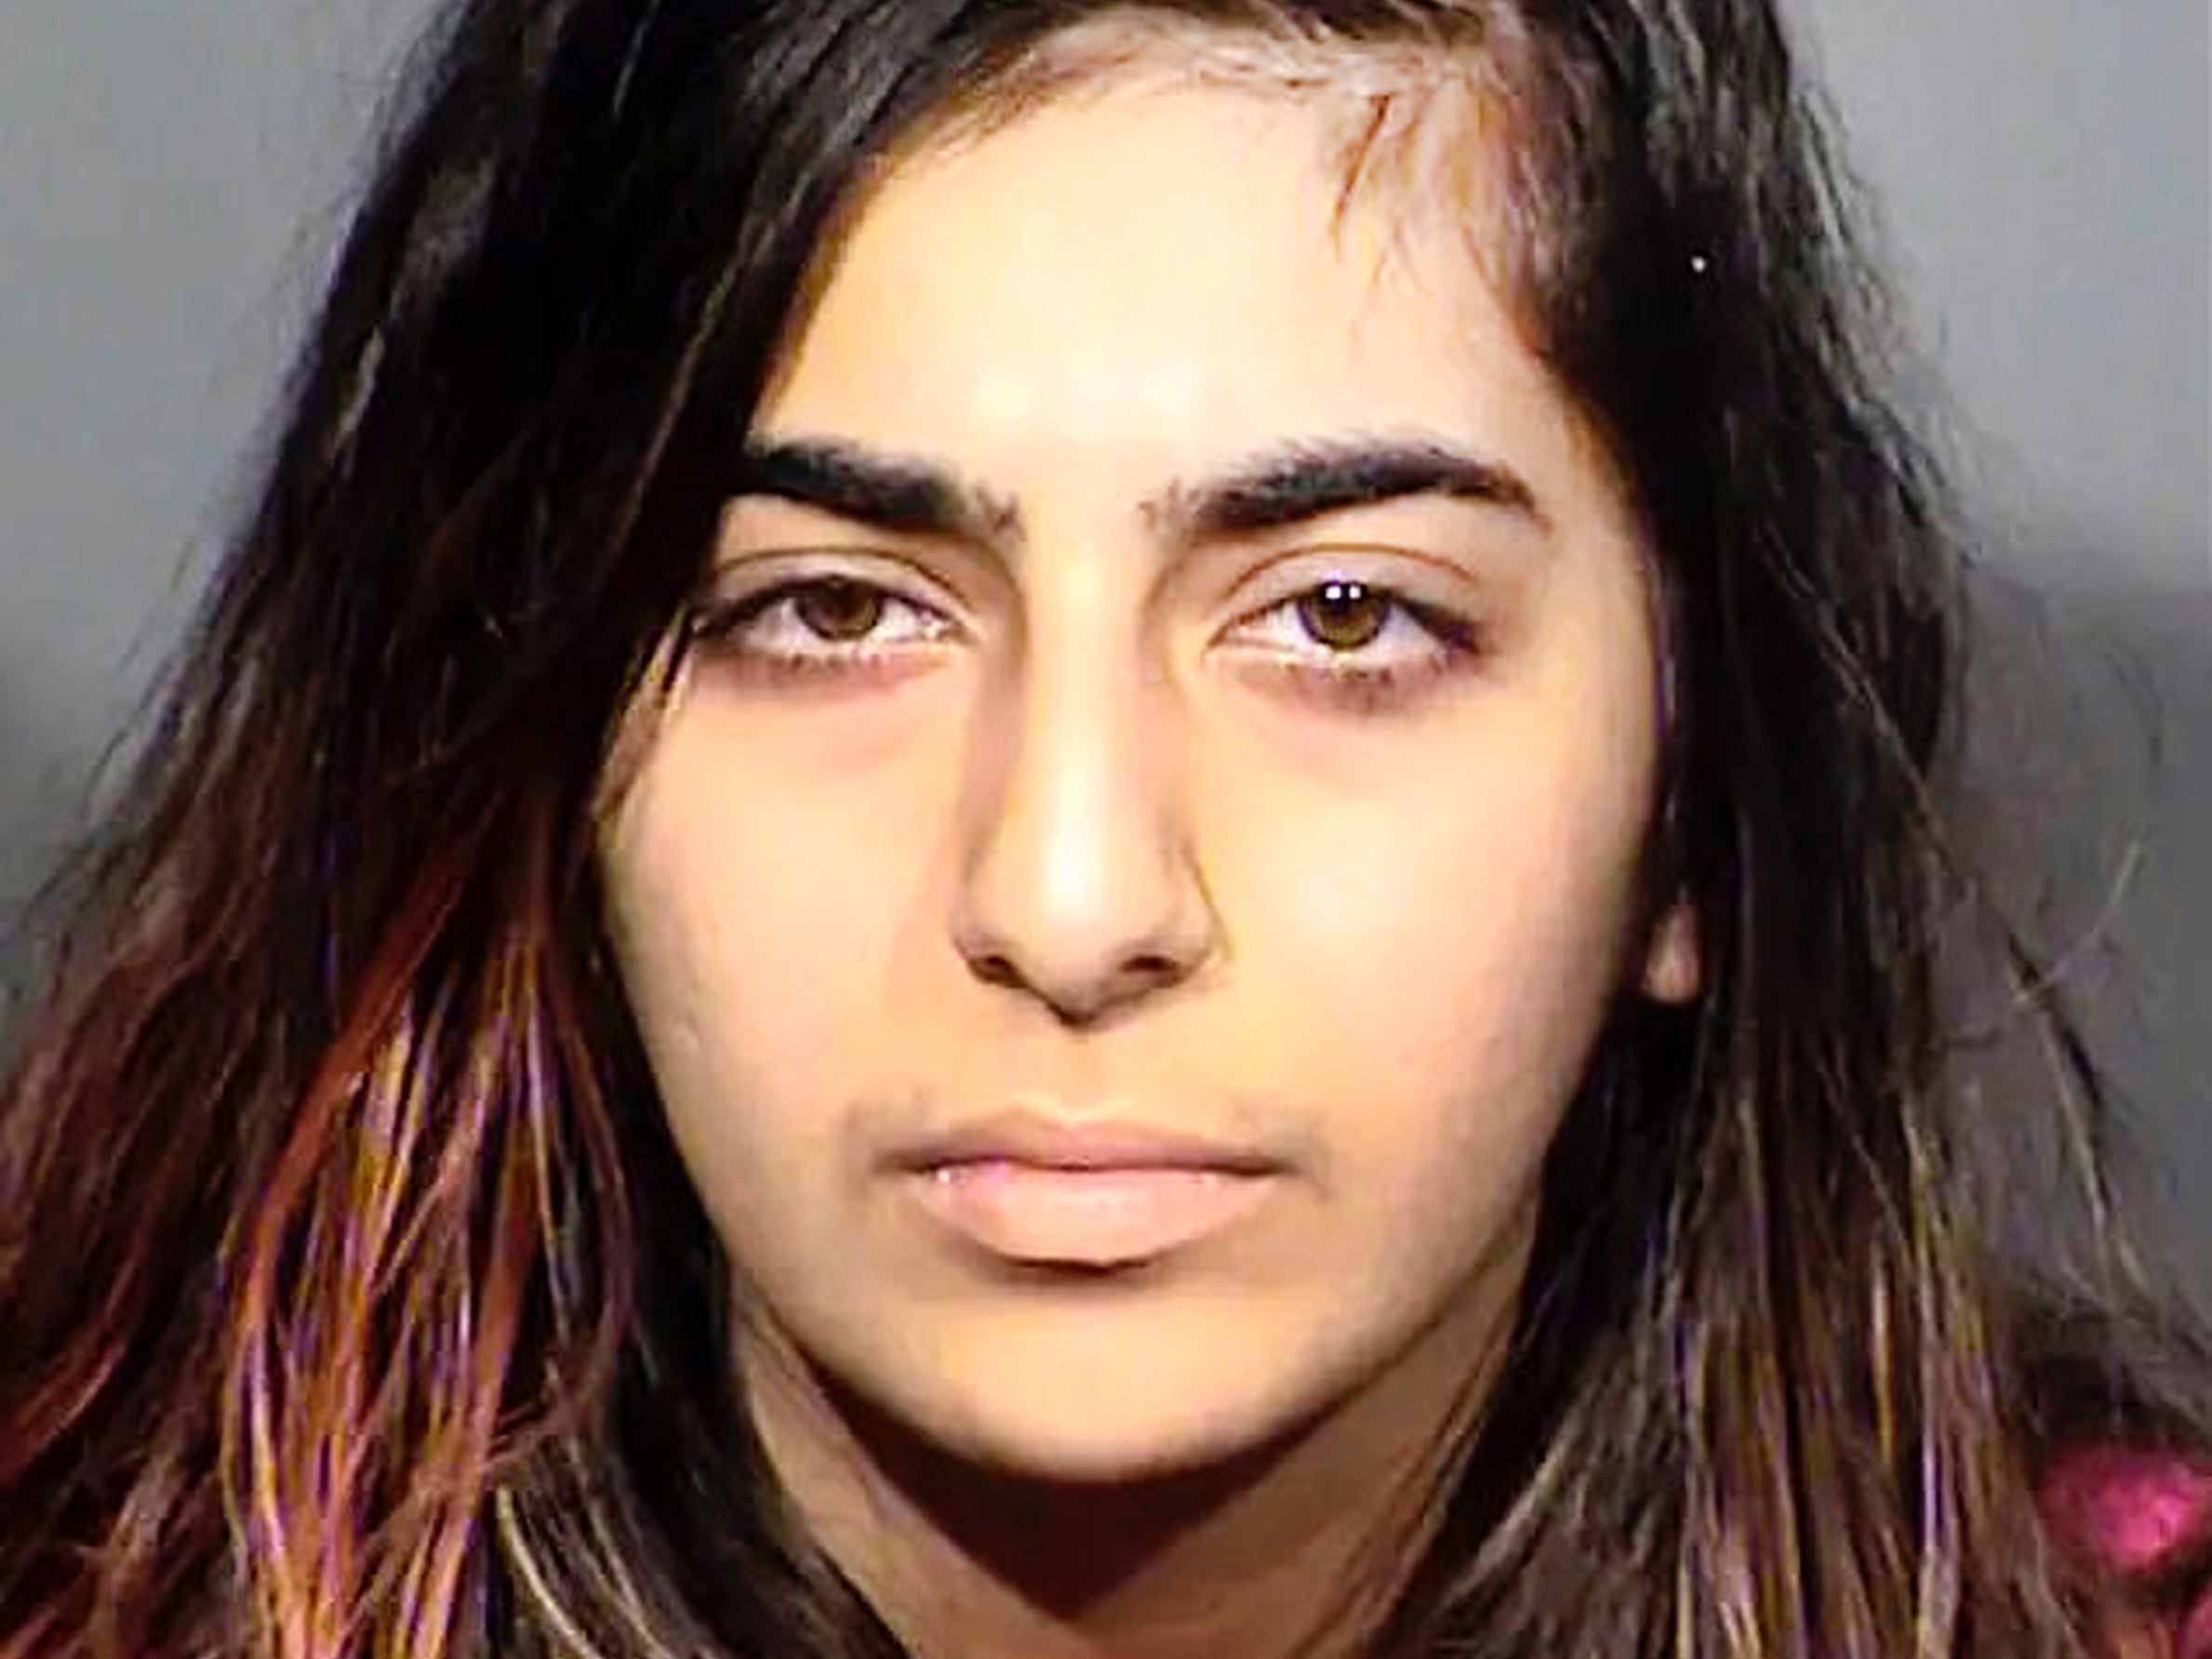 Texas woman gets probation for stabbing man during sex to avenge Iranian military leader The Independent picture